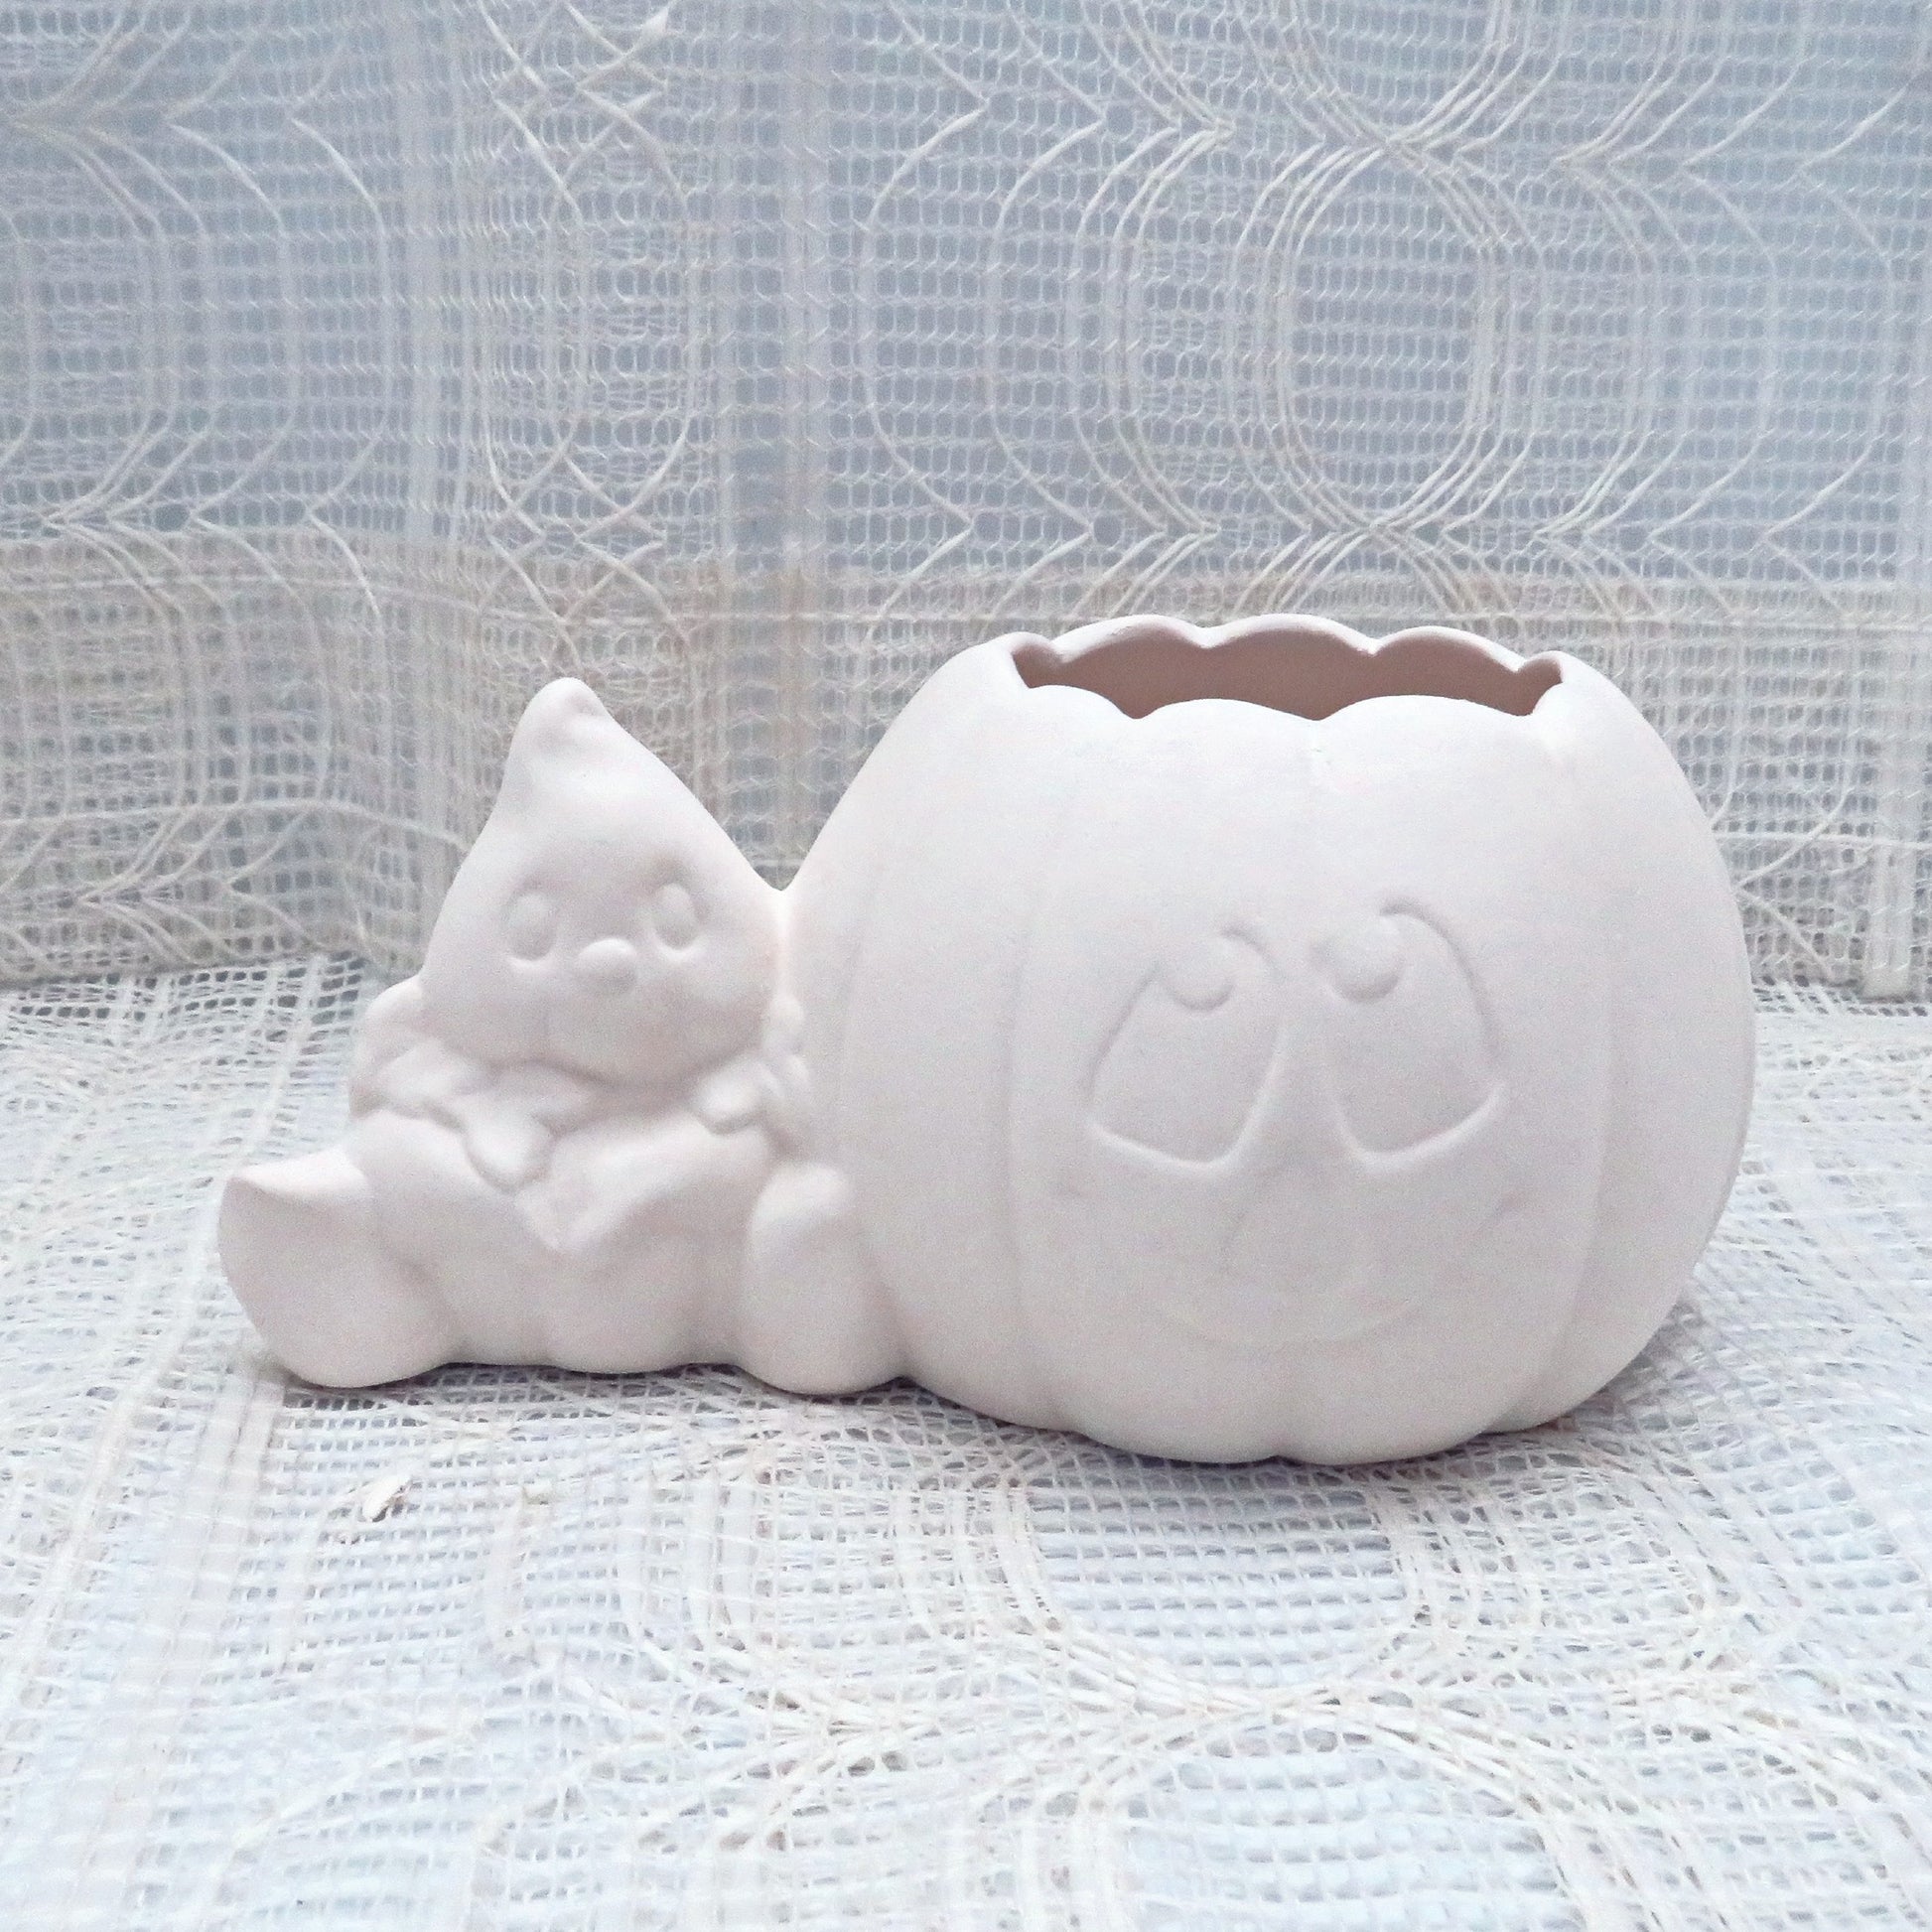 Handmade ready to paint ceramic pumpkin and ghost sitting on a table with an ecru table cloth and curtain